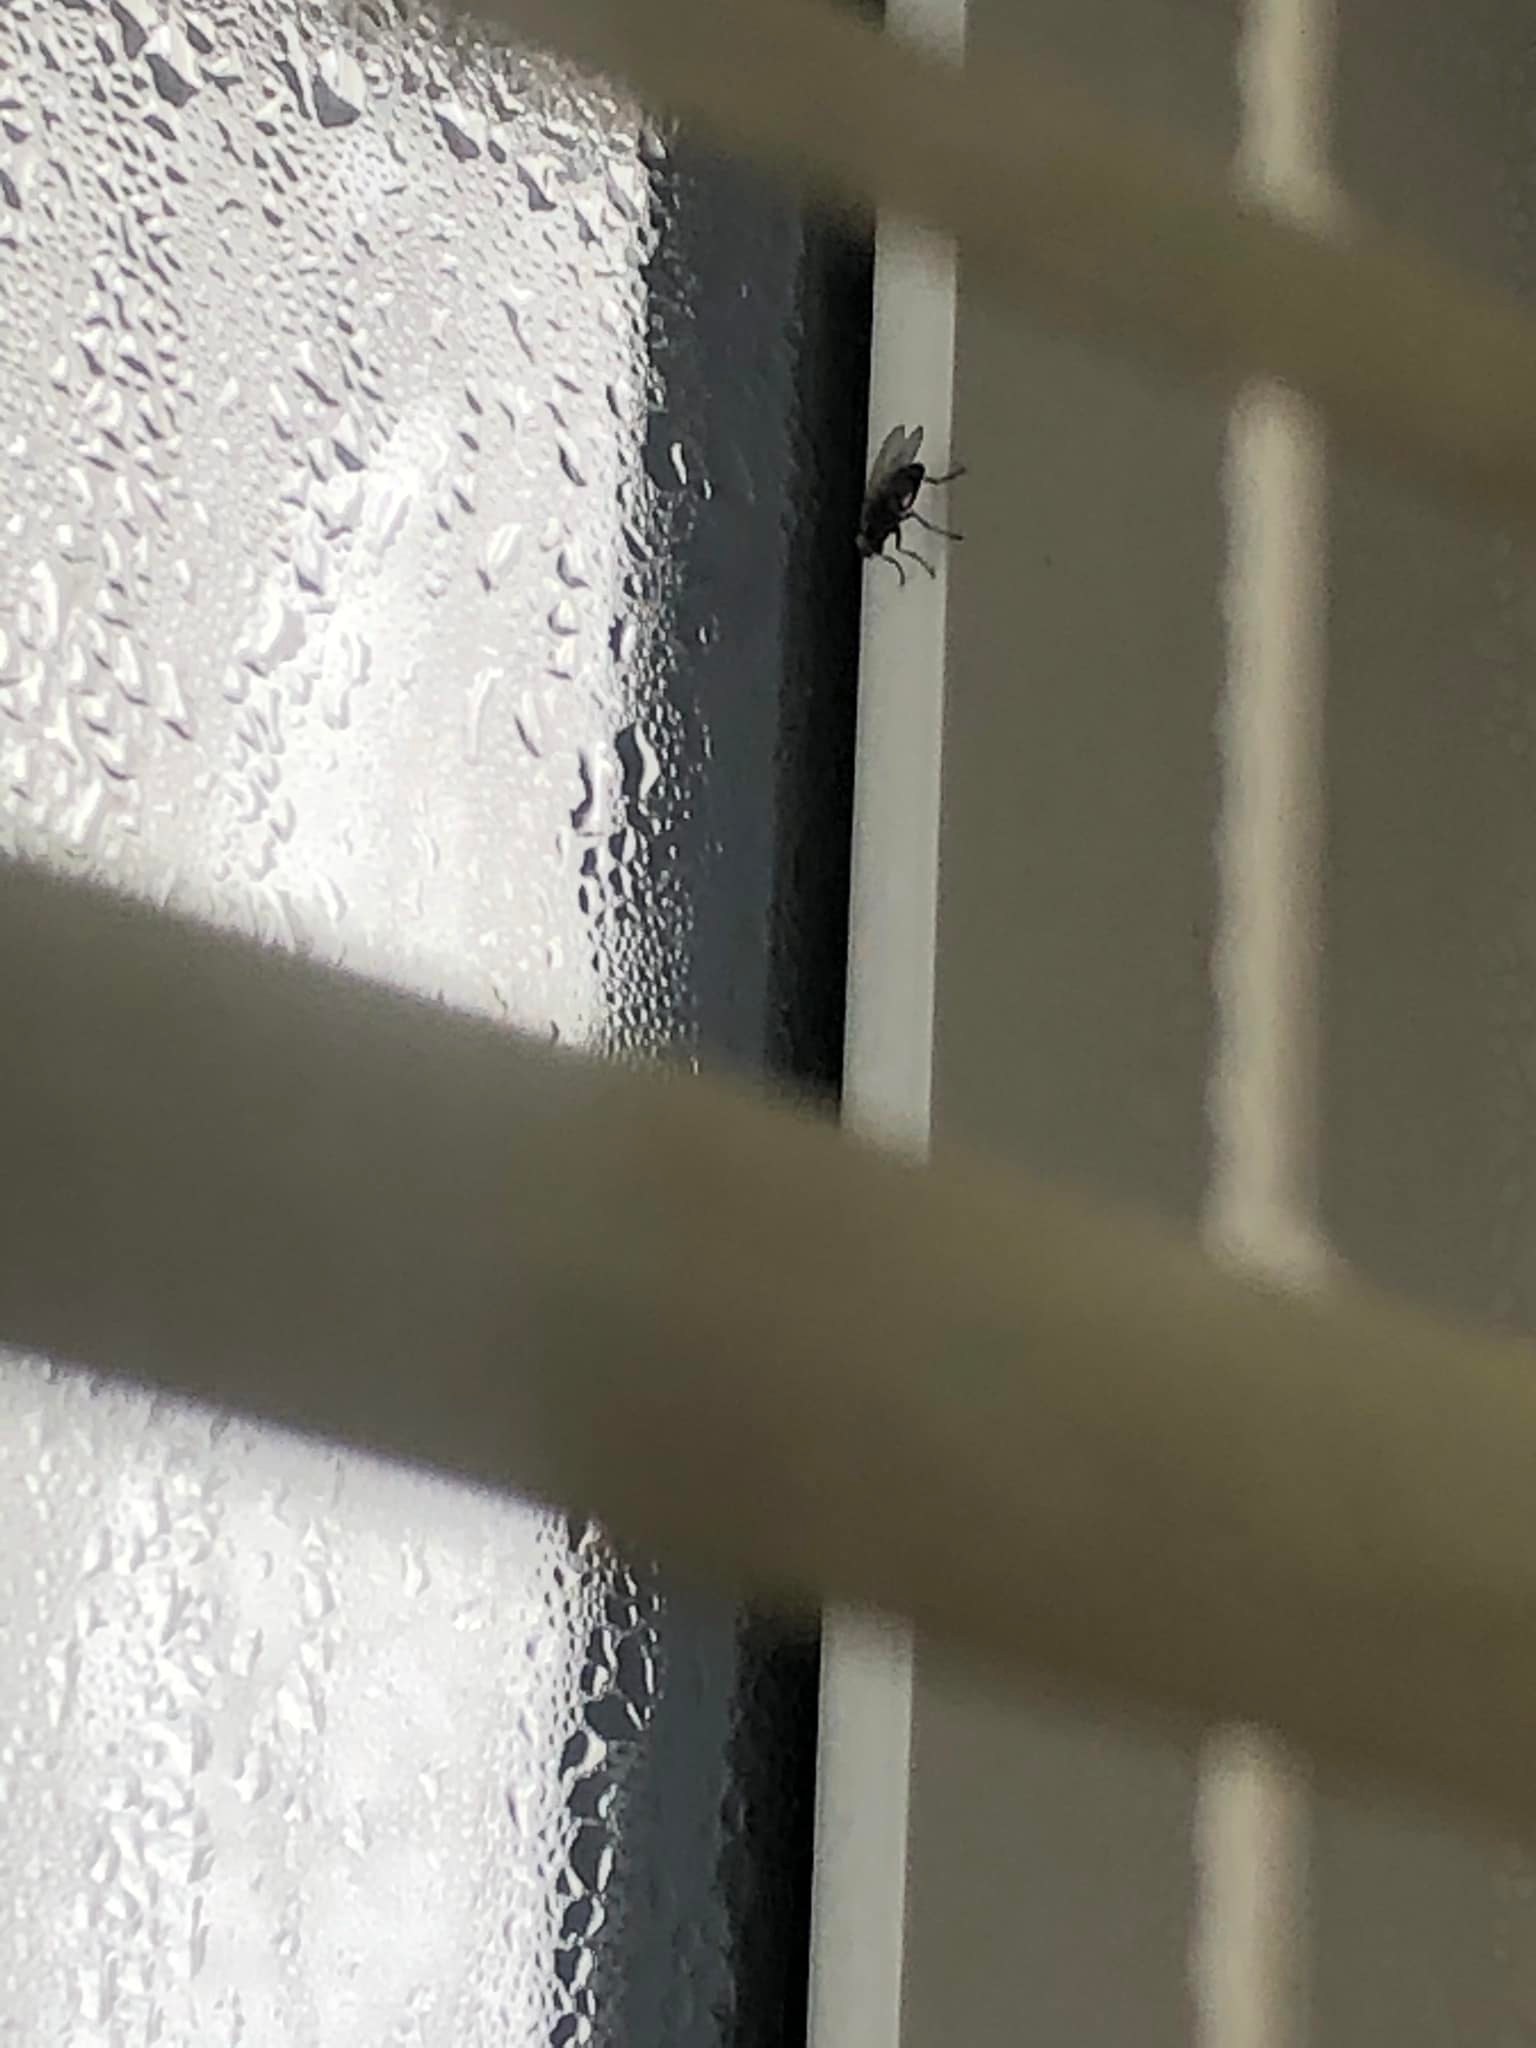 Little housefly right next to the nearly ice cold glass, looking outside. Yeah, it's really cold out there now girl.